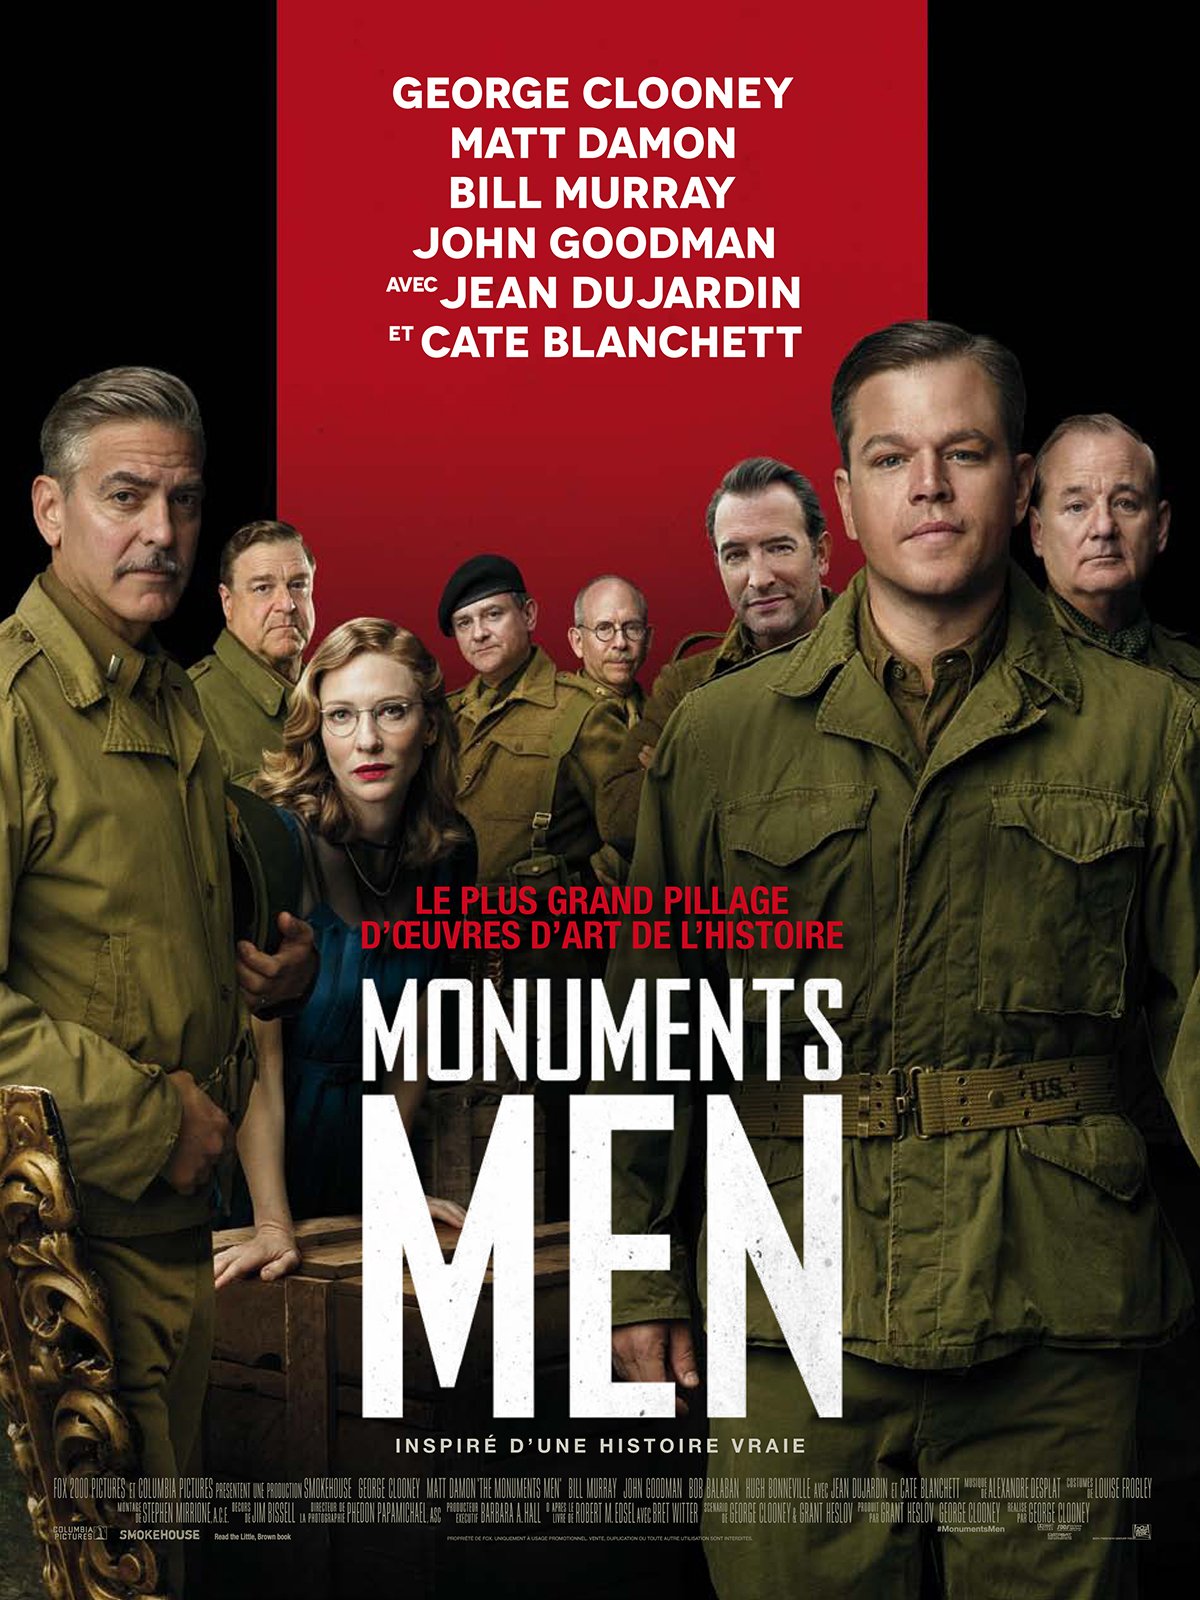 The Monuments Men by Bret Witter